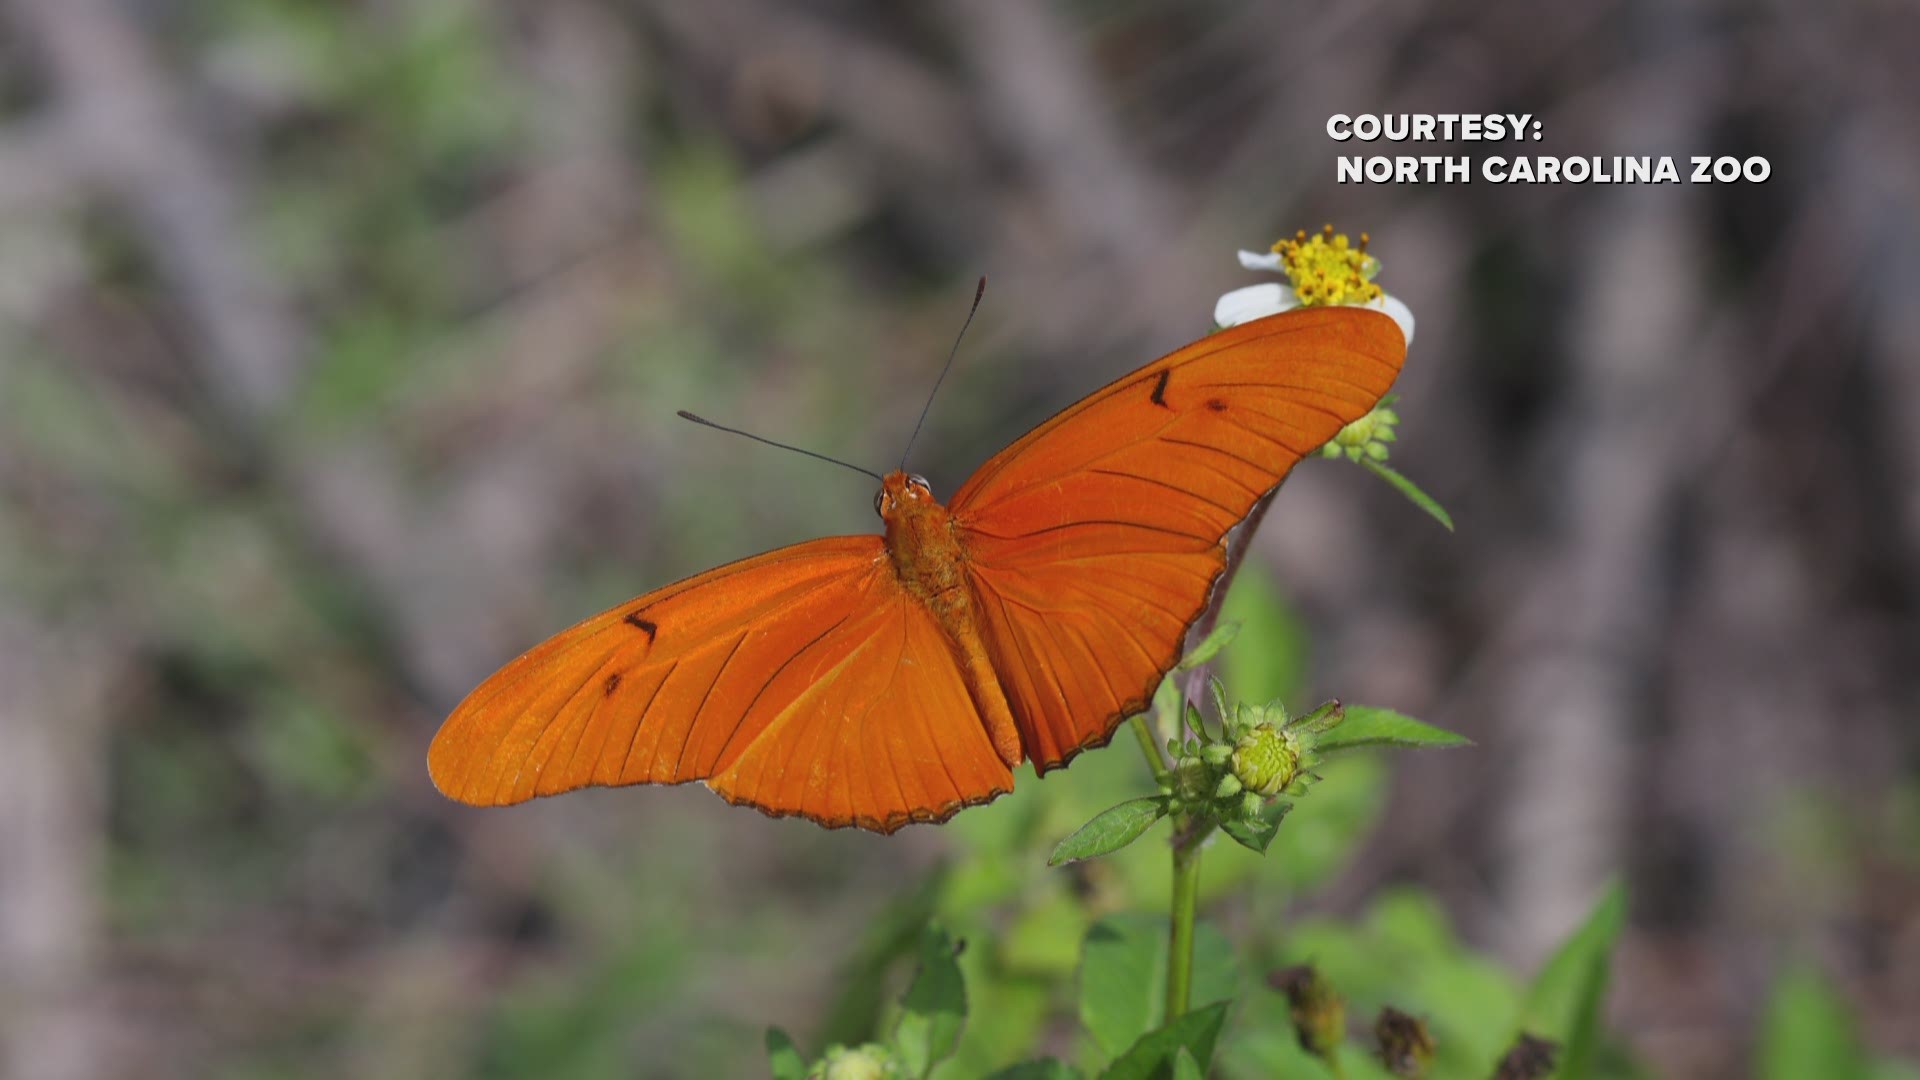 Here's some of what you'll see at the North Carolina Zoo's Kaleidoscope Butterfly Garden.